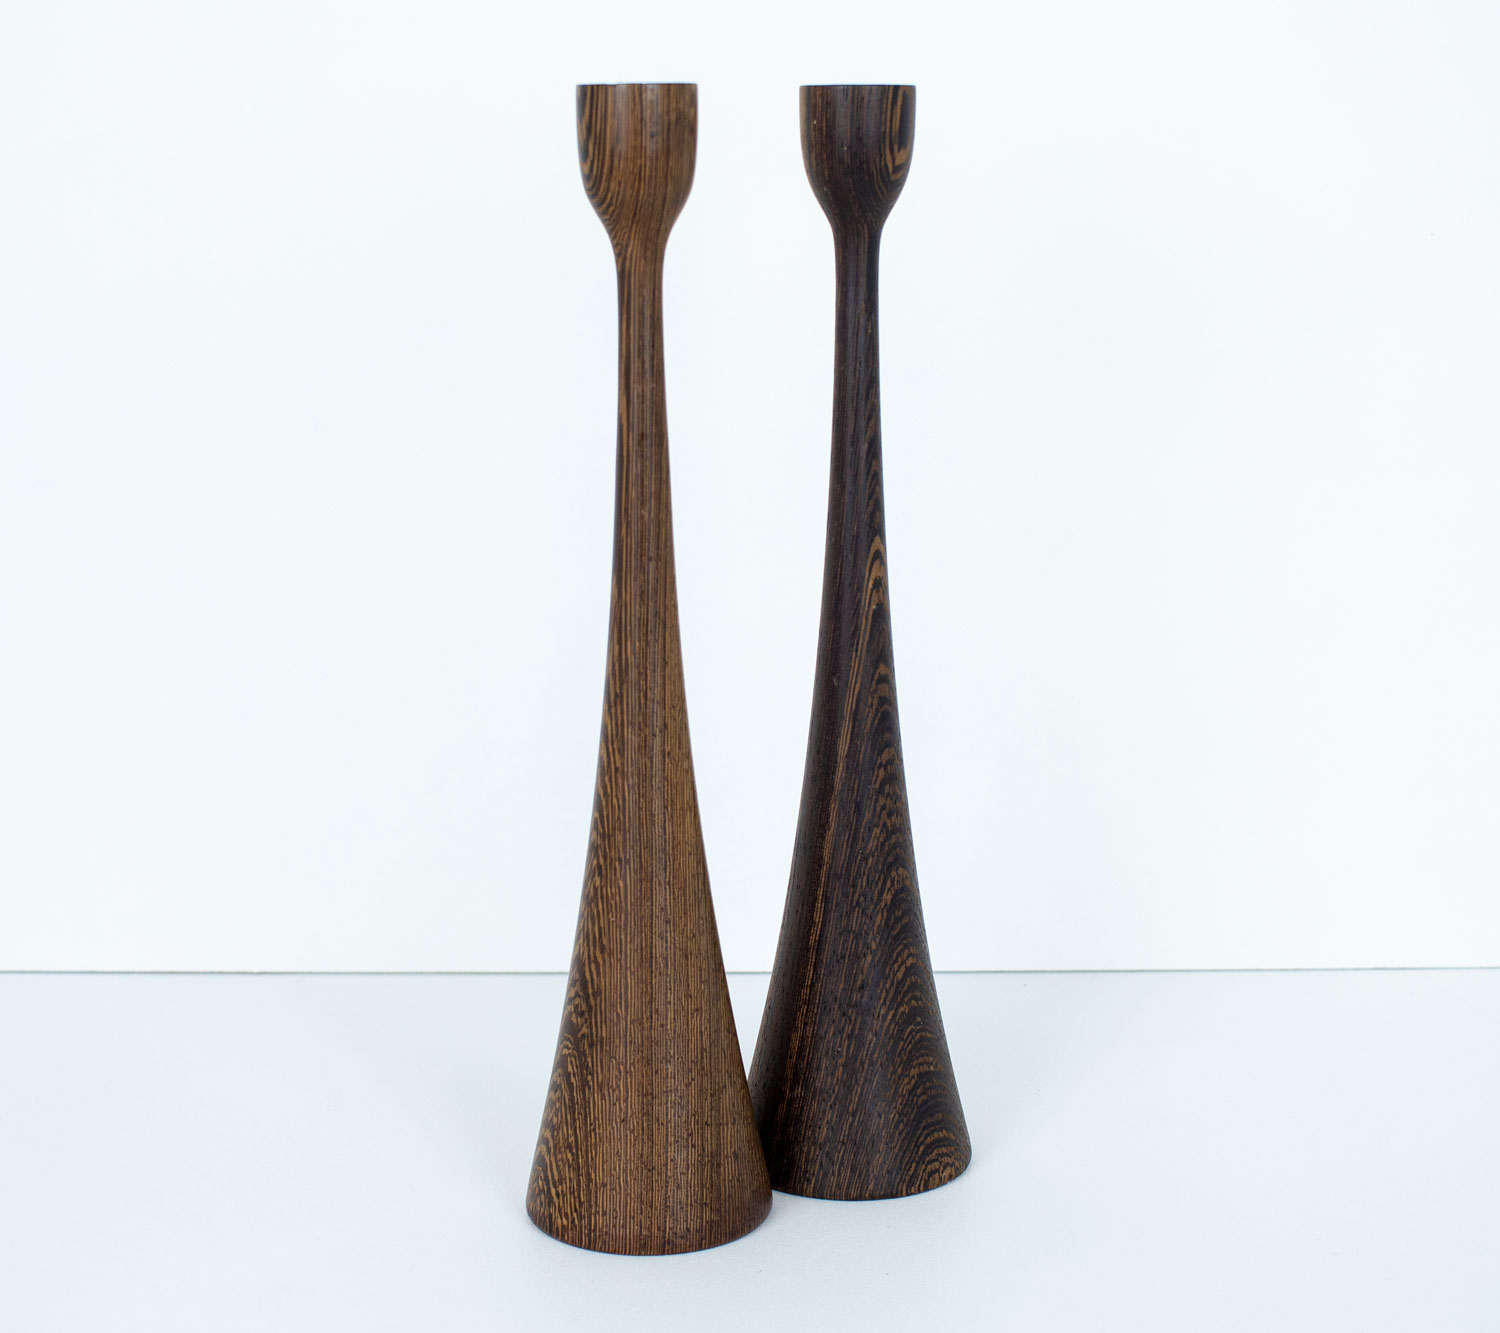 Danish Wenge Pair of Candle Holders By ESA